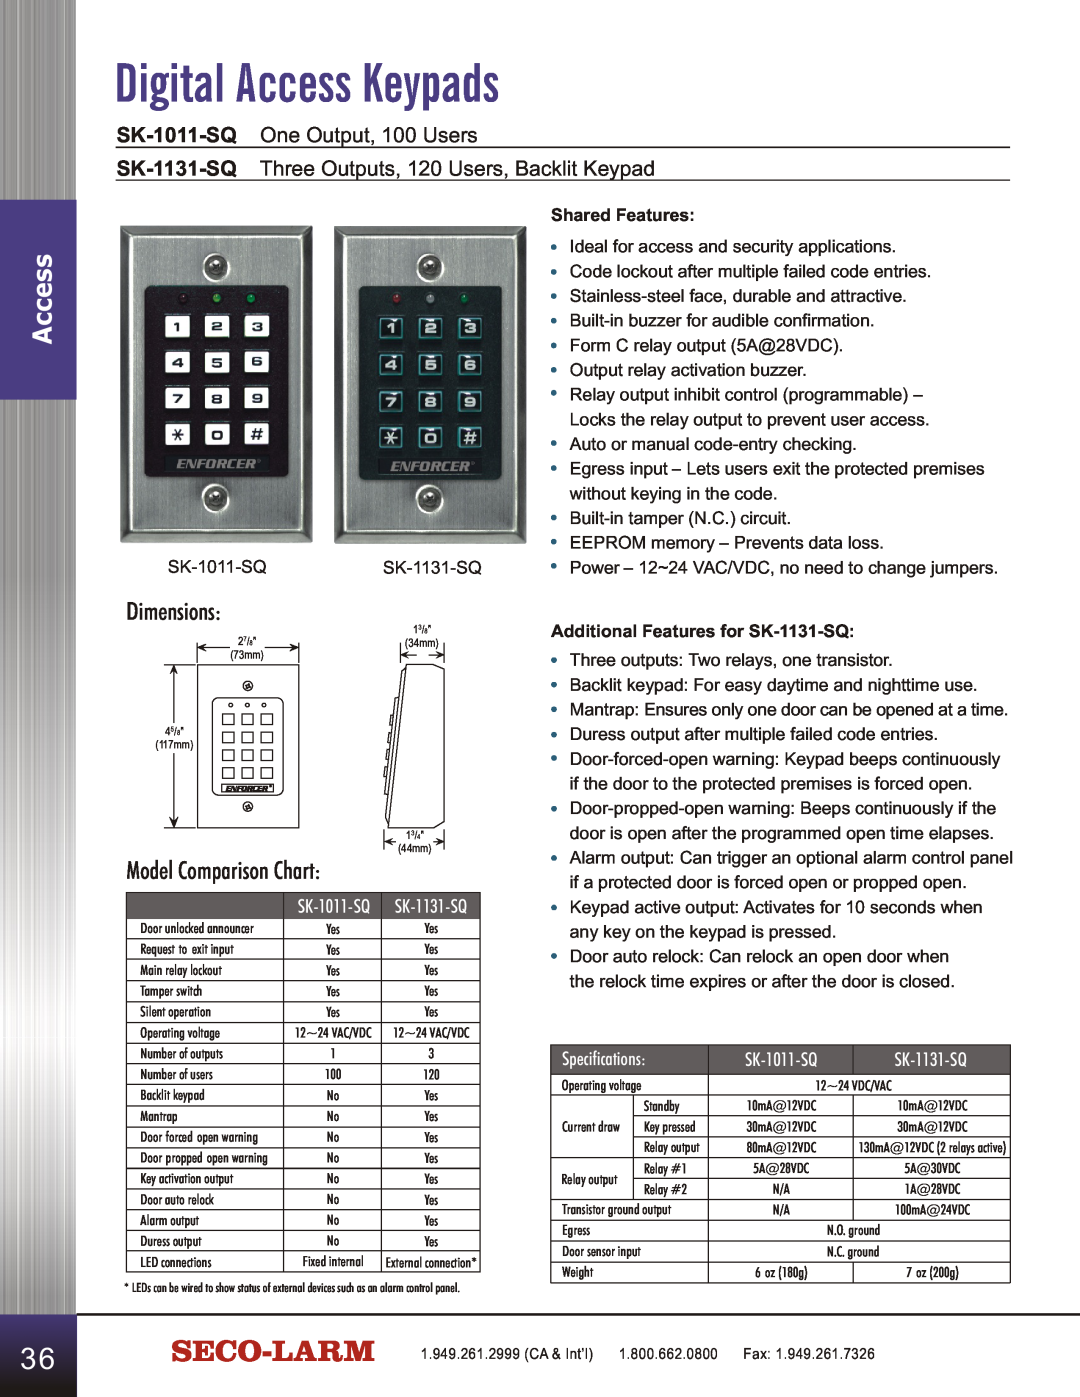 SECO-LARM USA SD-C141S manual Digital Access Keypads, Model Comparison Chart, SK-1011-SQ One Output, 100 Users, Dimensions 